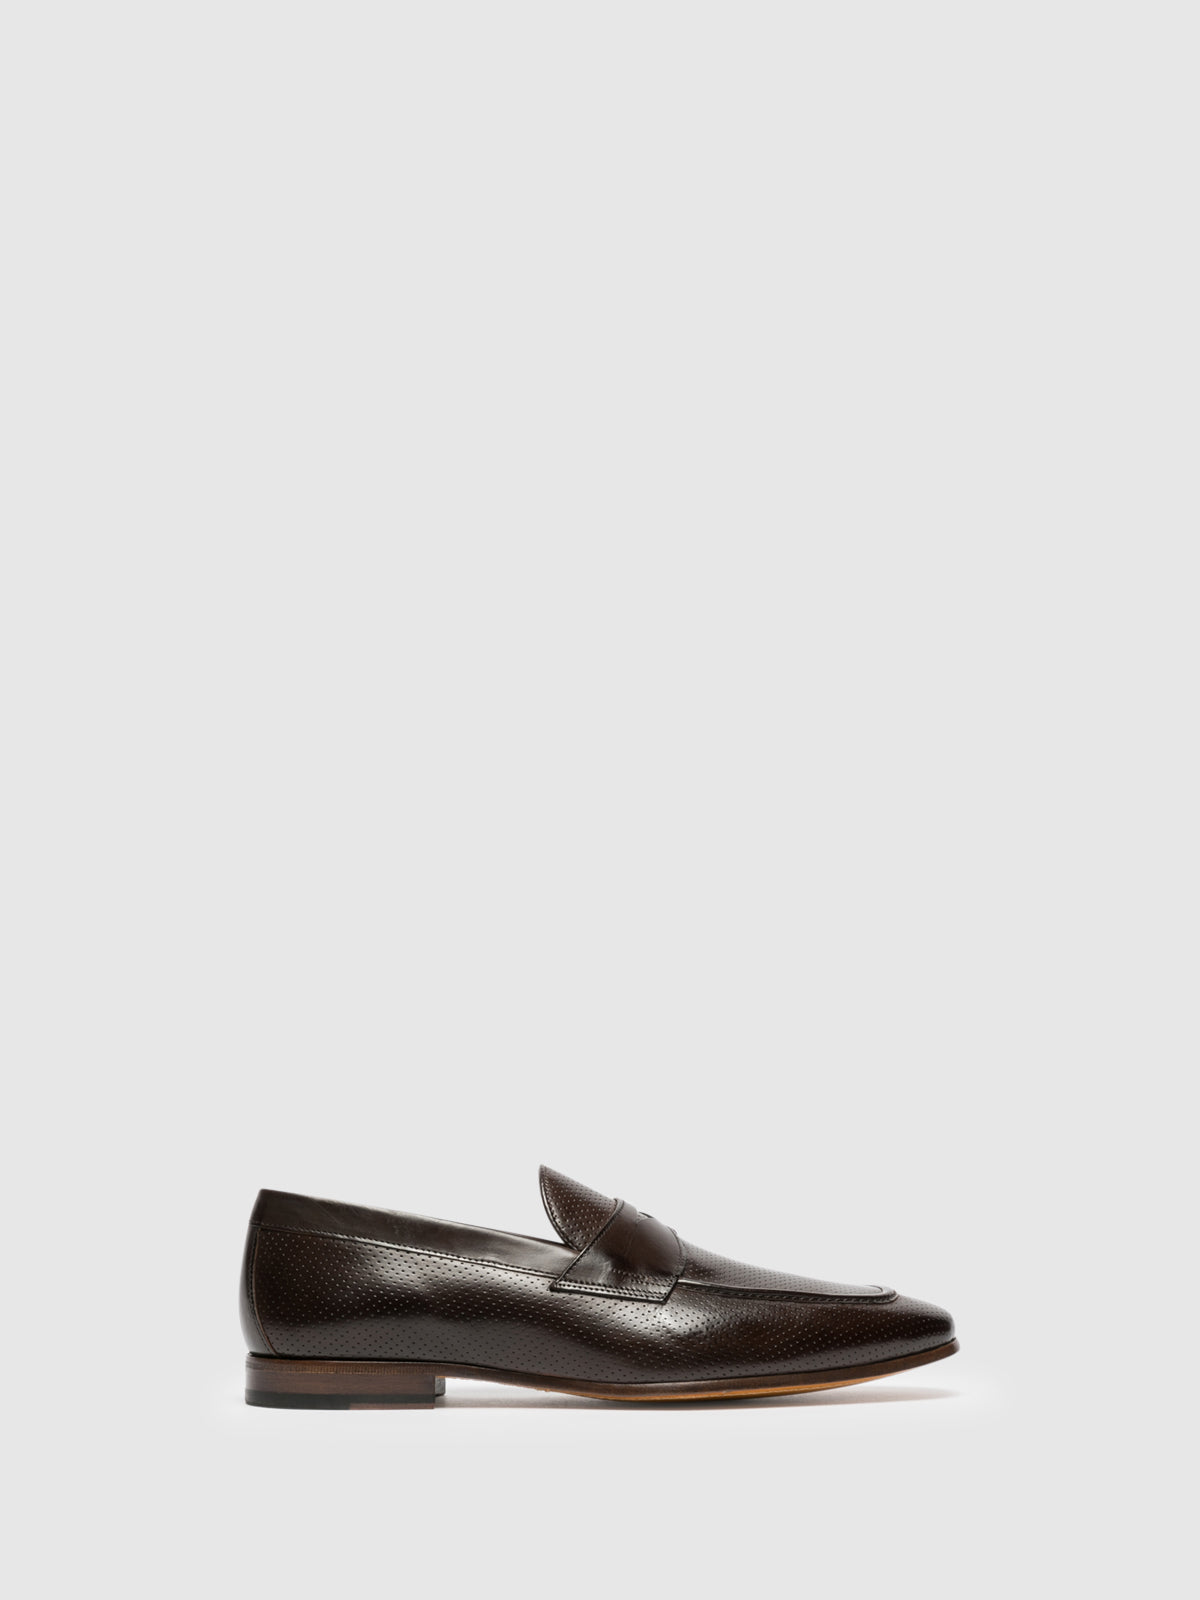 Gino Bianchi Brown Loafers Shoes